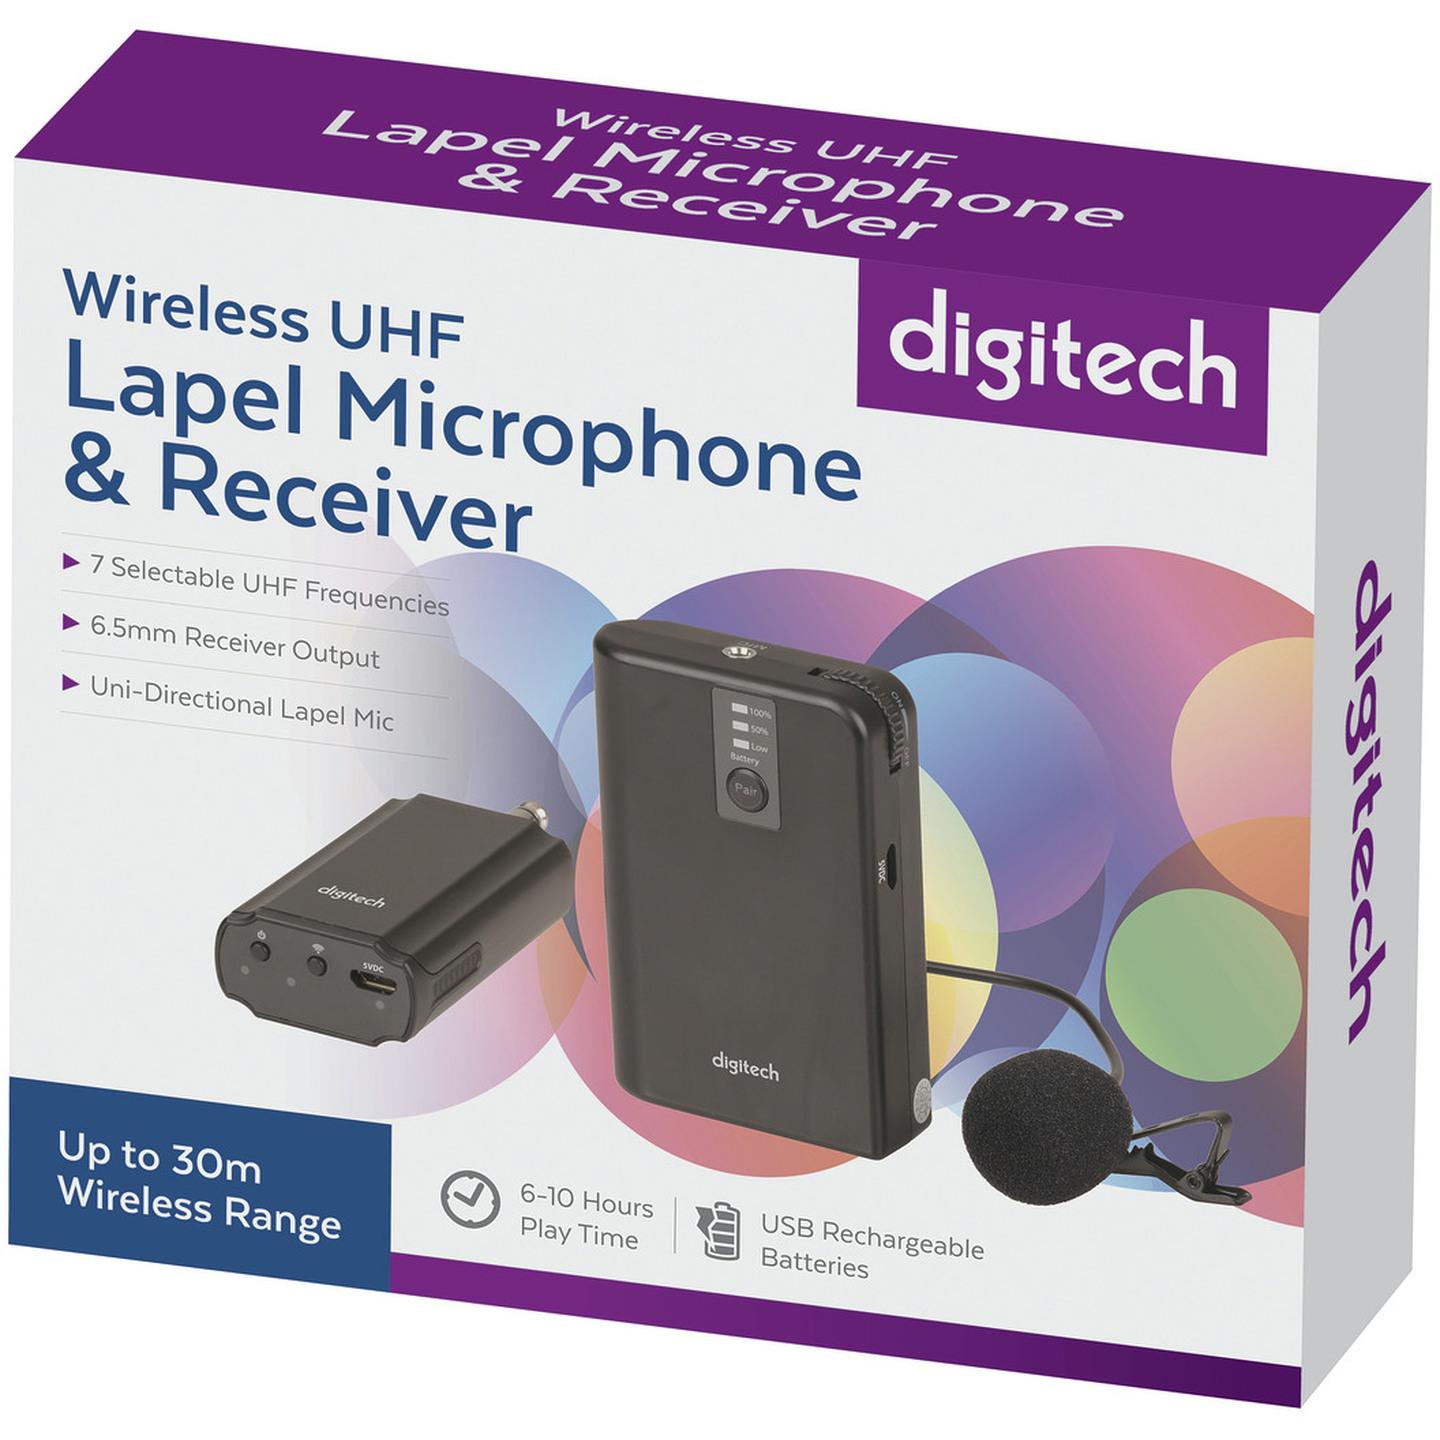 Digitech Wireless UHF Lapel Microphone and Receiver